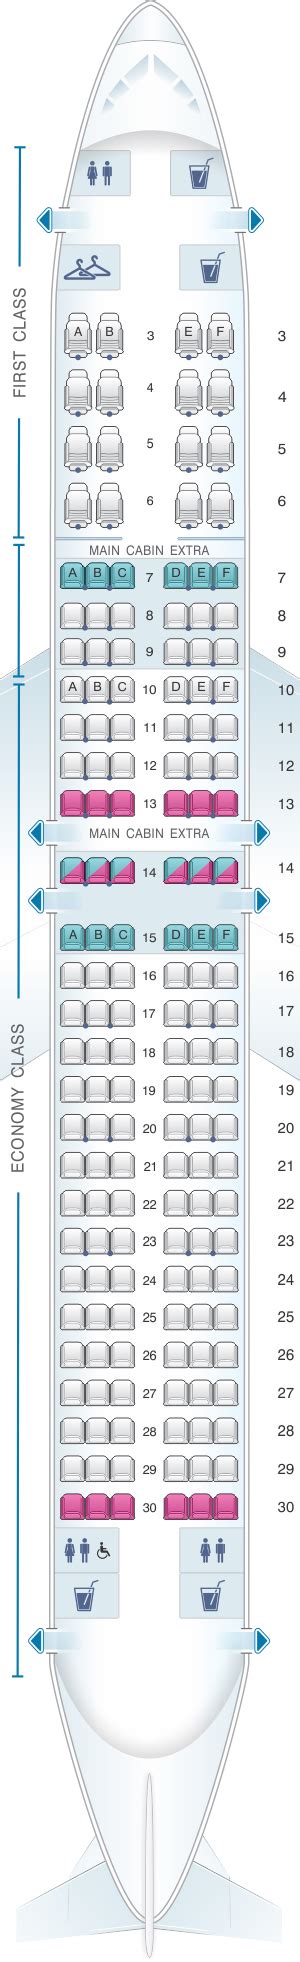 The Delta Airlines Boeing 737-800 features 160 seats in a 3 cabin configuration. Economy has 126 seats in a 3-3 config; Premium economy has 18 seats in a 3-3 config; First class has 16 seats in a 2-2 config; this is pretty standard for these aircraft. Legroom-wise, the Economy pitch of 31-32" is average, the Premium economy pitch of 34" is .... 